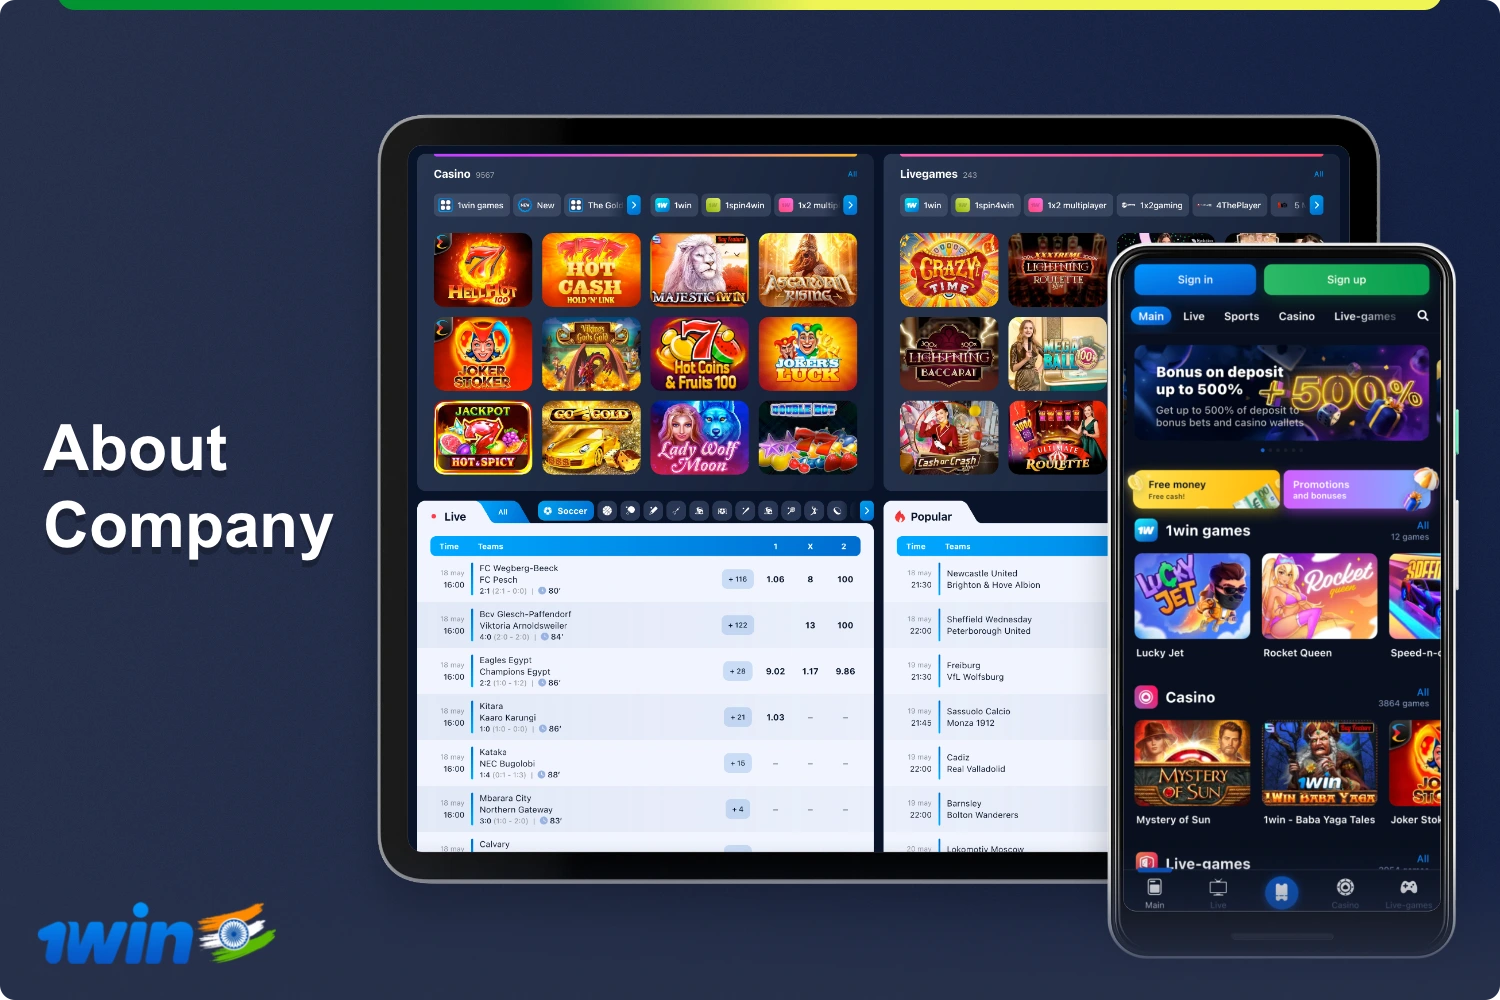 1win offers its Indian customers a user-friendly website and mobile app with 24/7 support